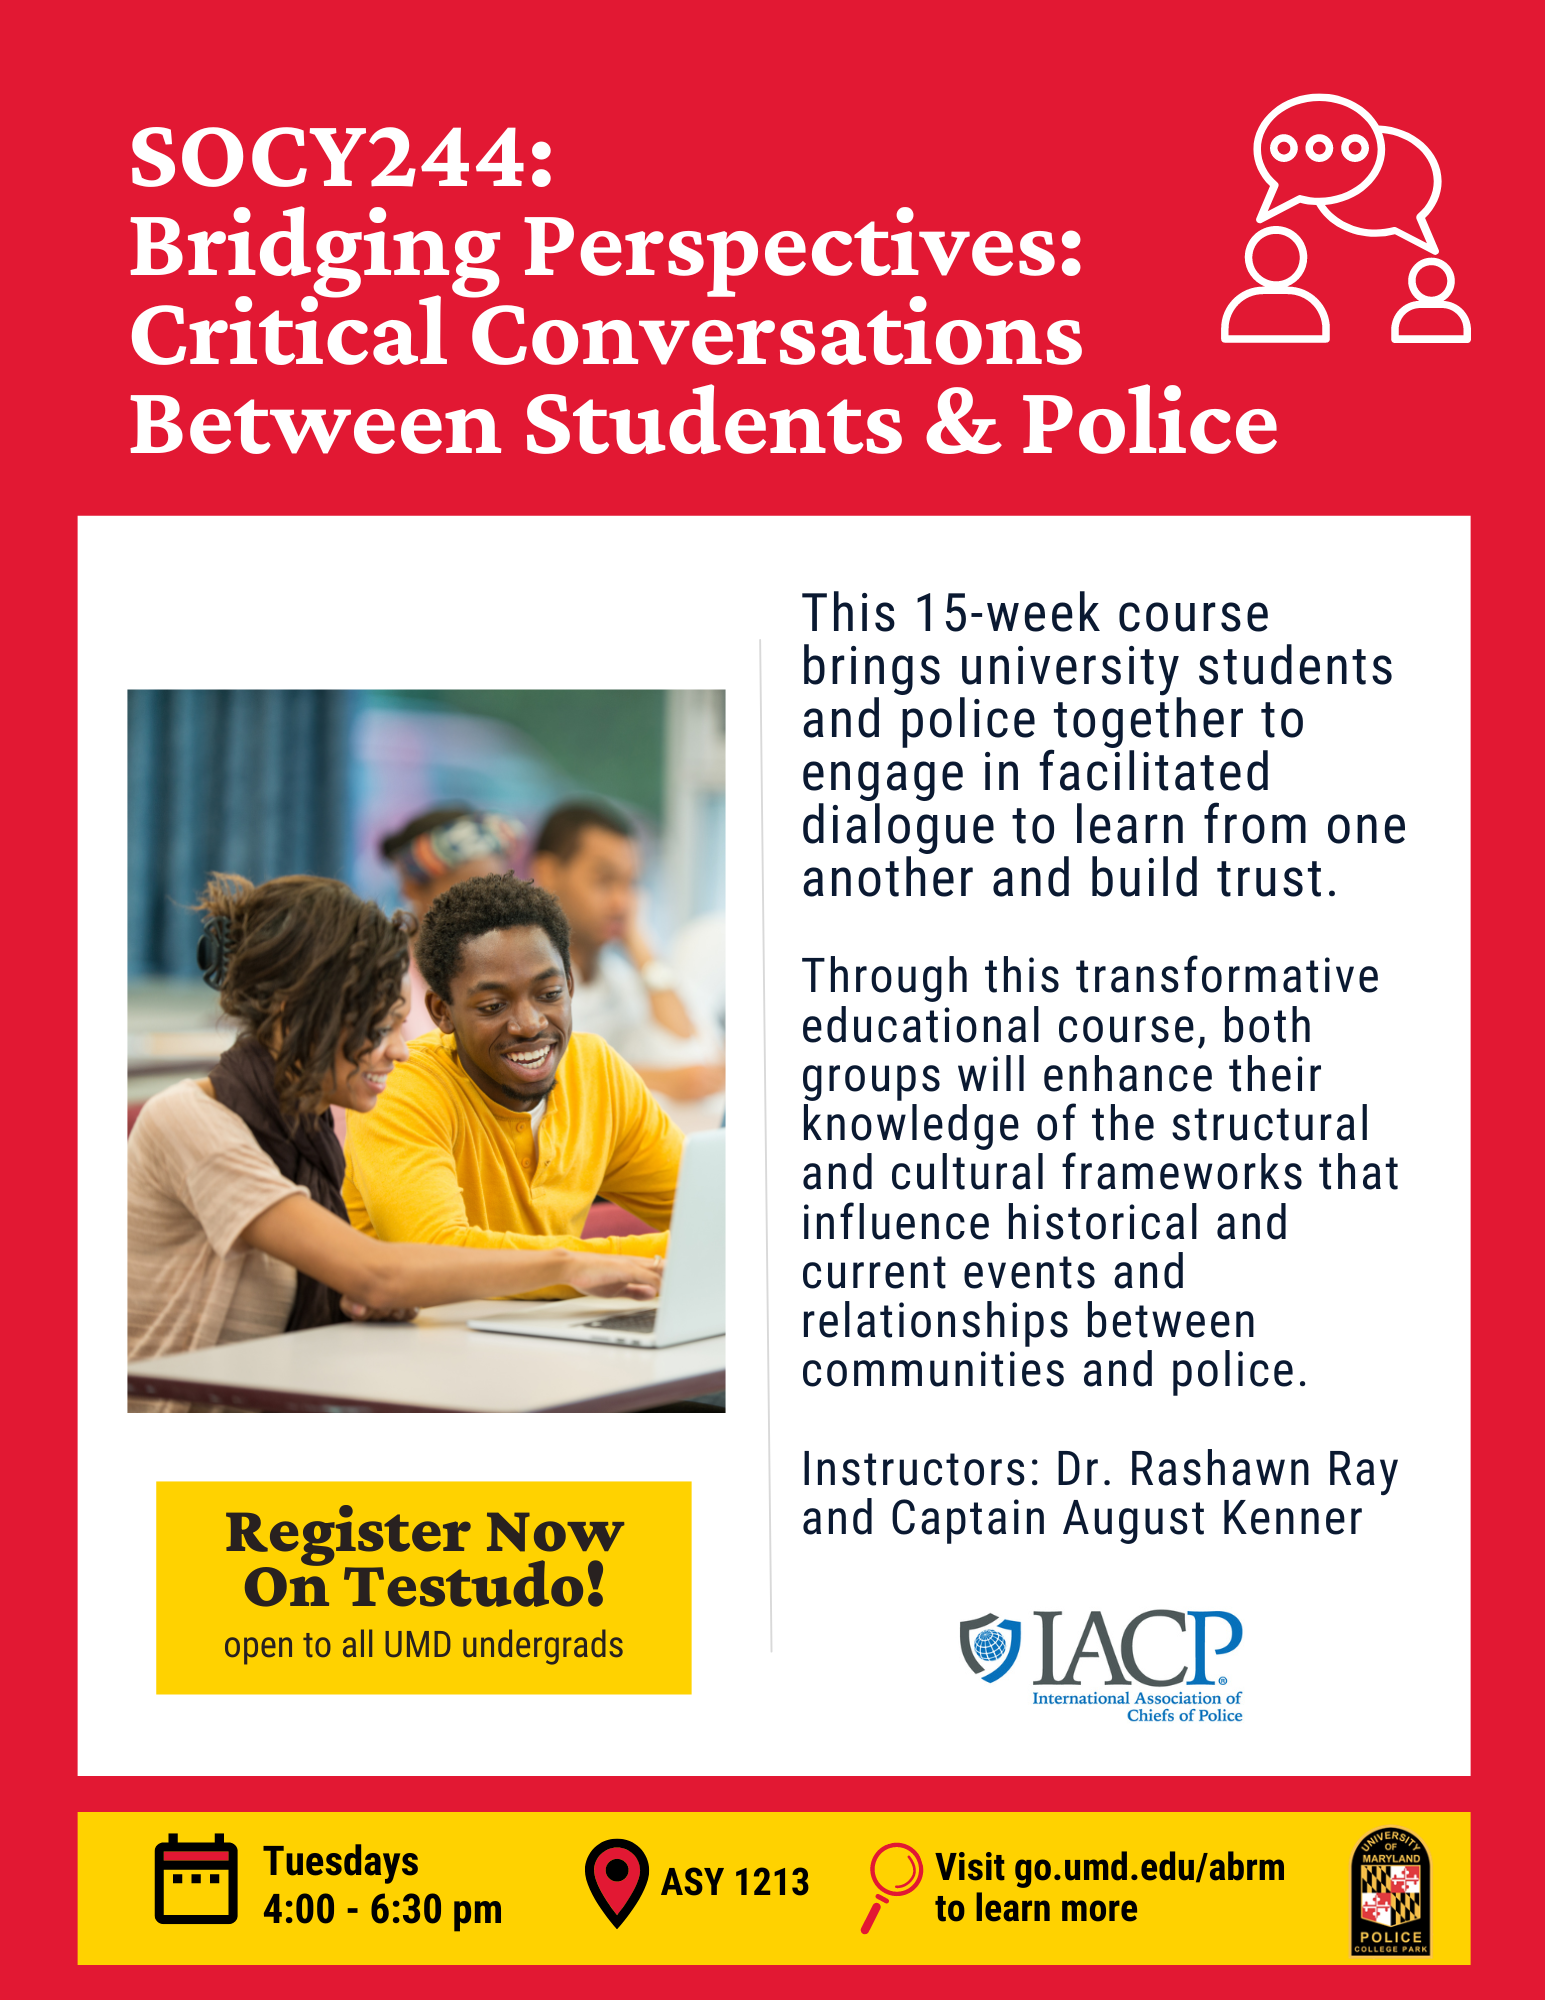 SOCY244 Bridging Perspectives Critical Conversations Between Students & Police